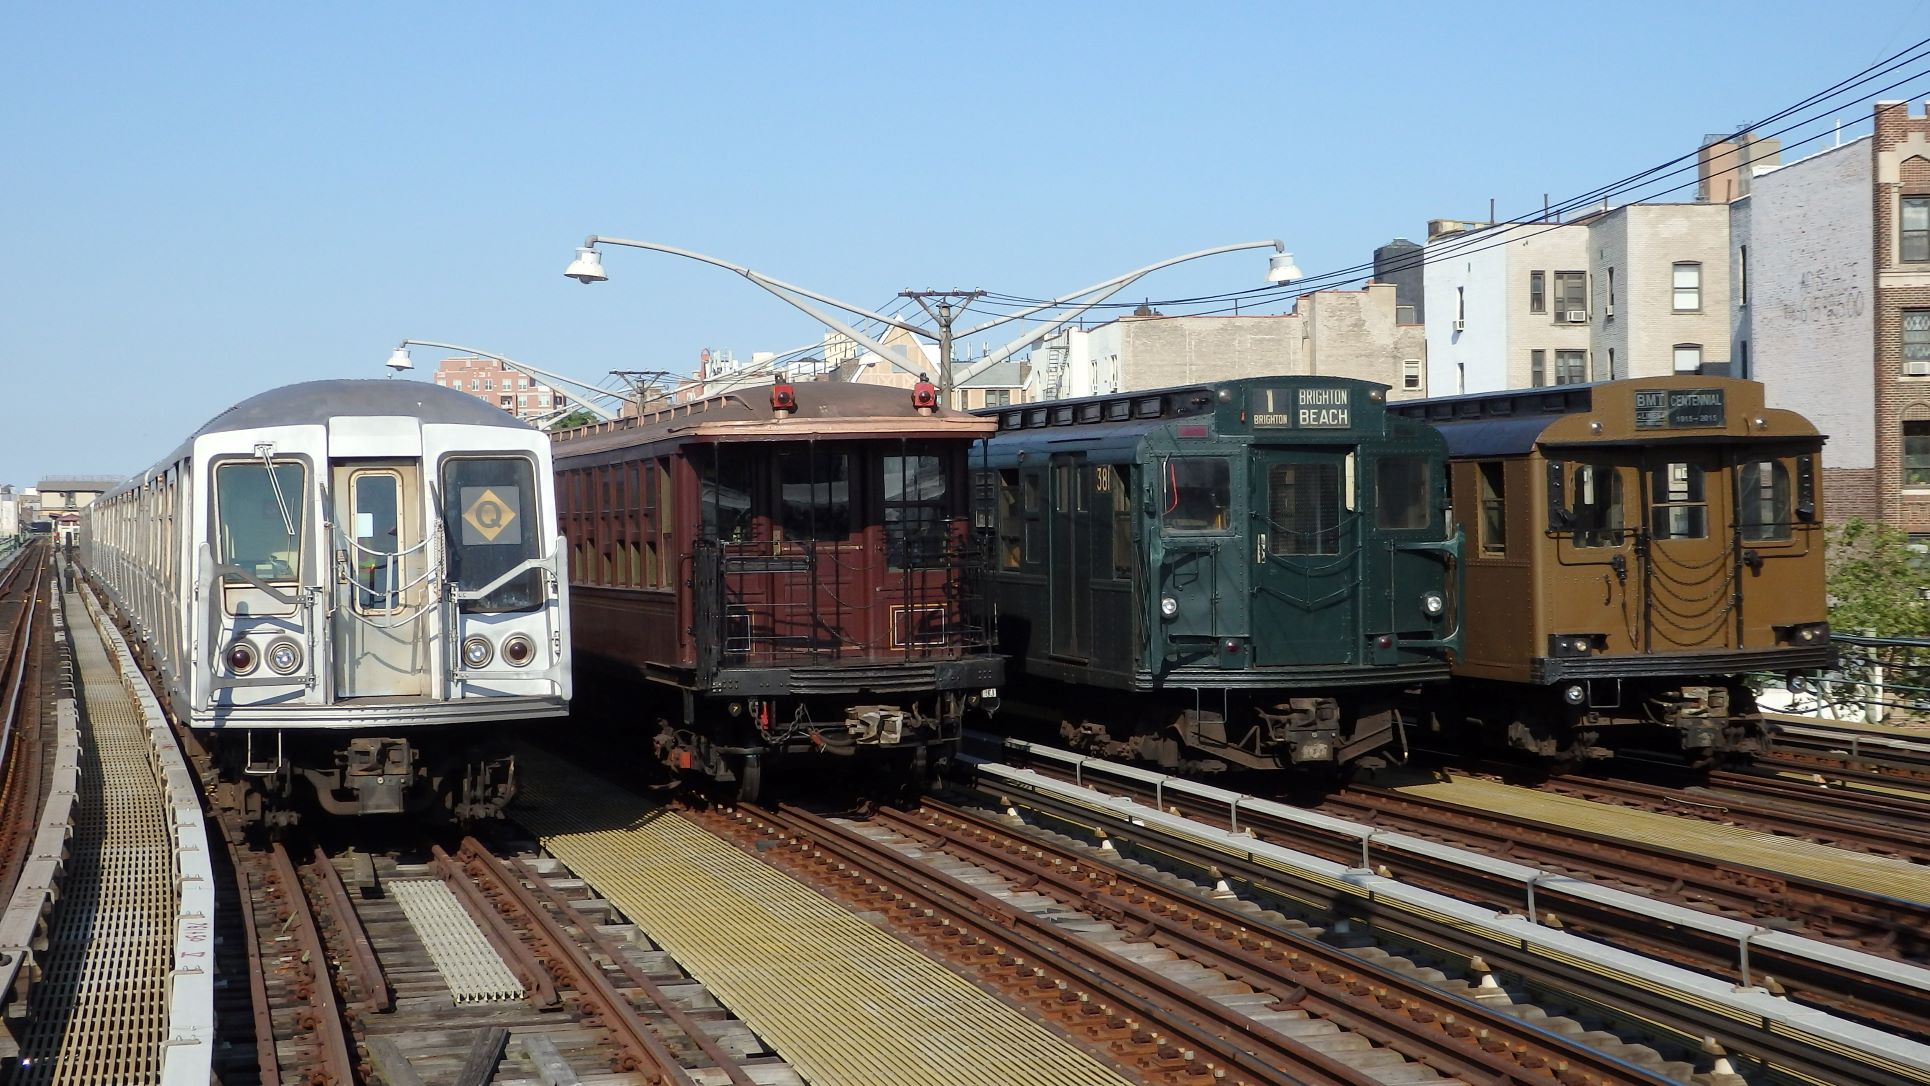 ICYMI: Ride Vintage Trains at the New York Transit Museum's Parade of Trains at Brighton Beach